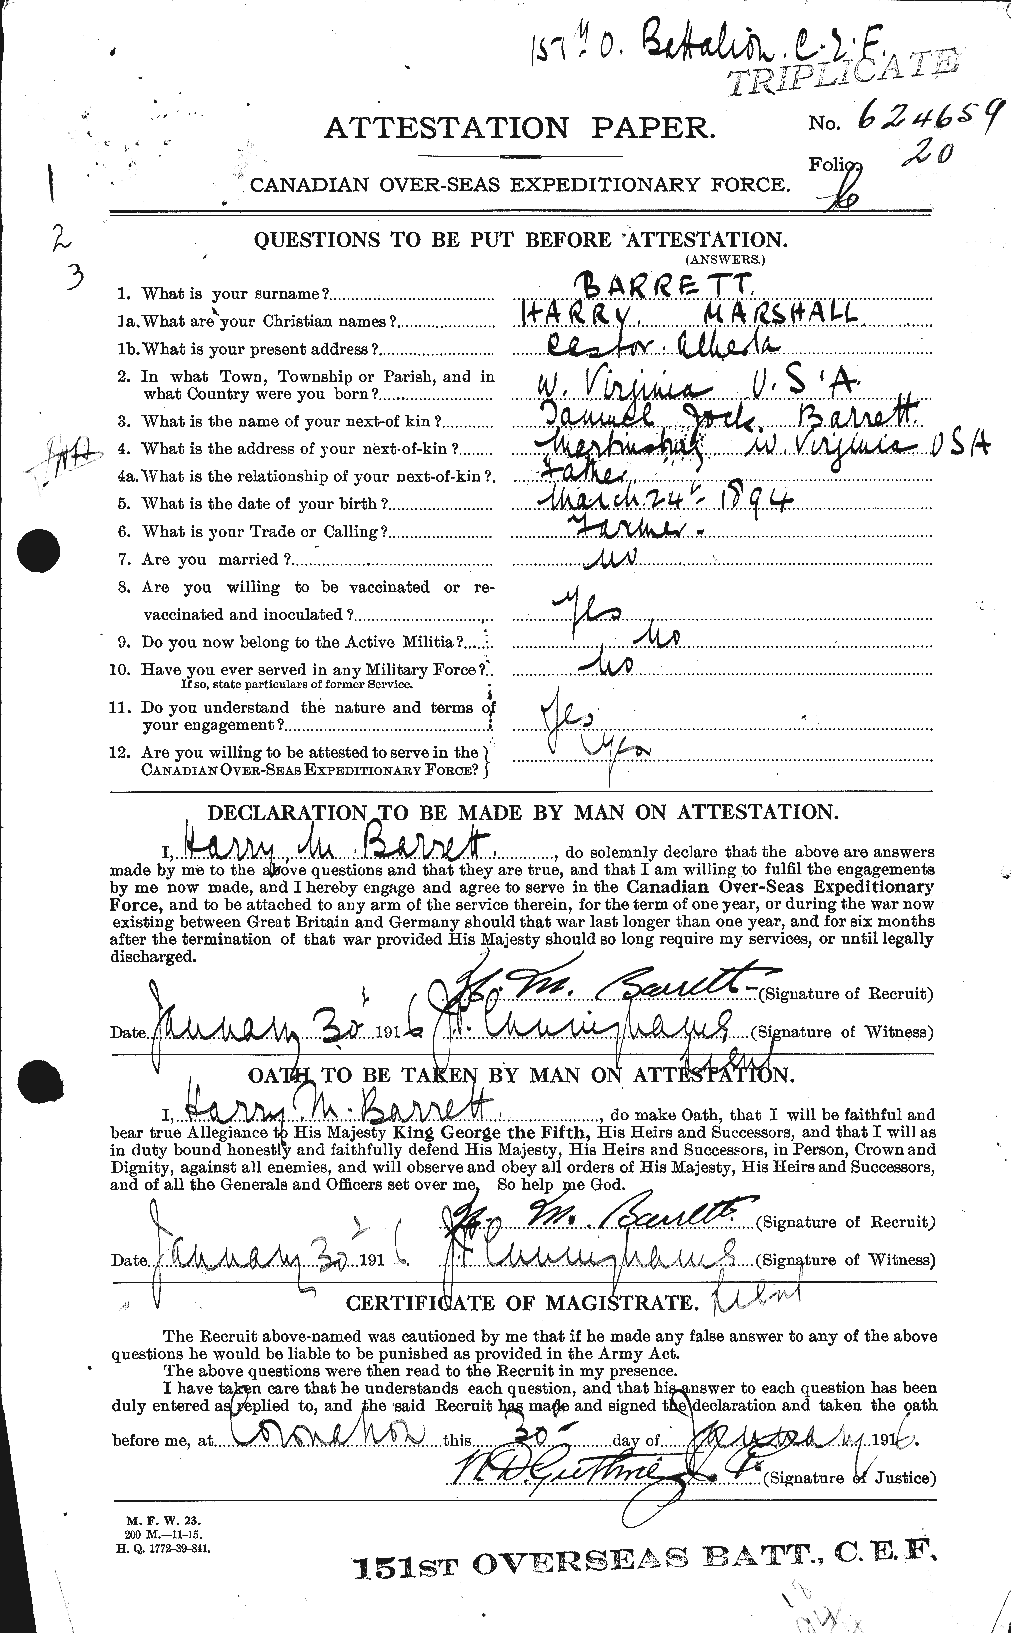 Personnel Records of the First World War - CEF 220288a